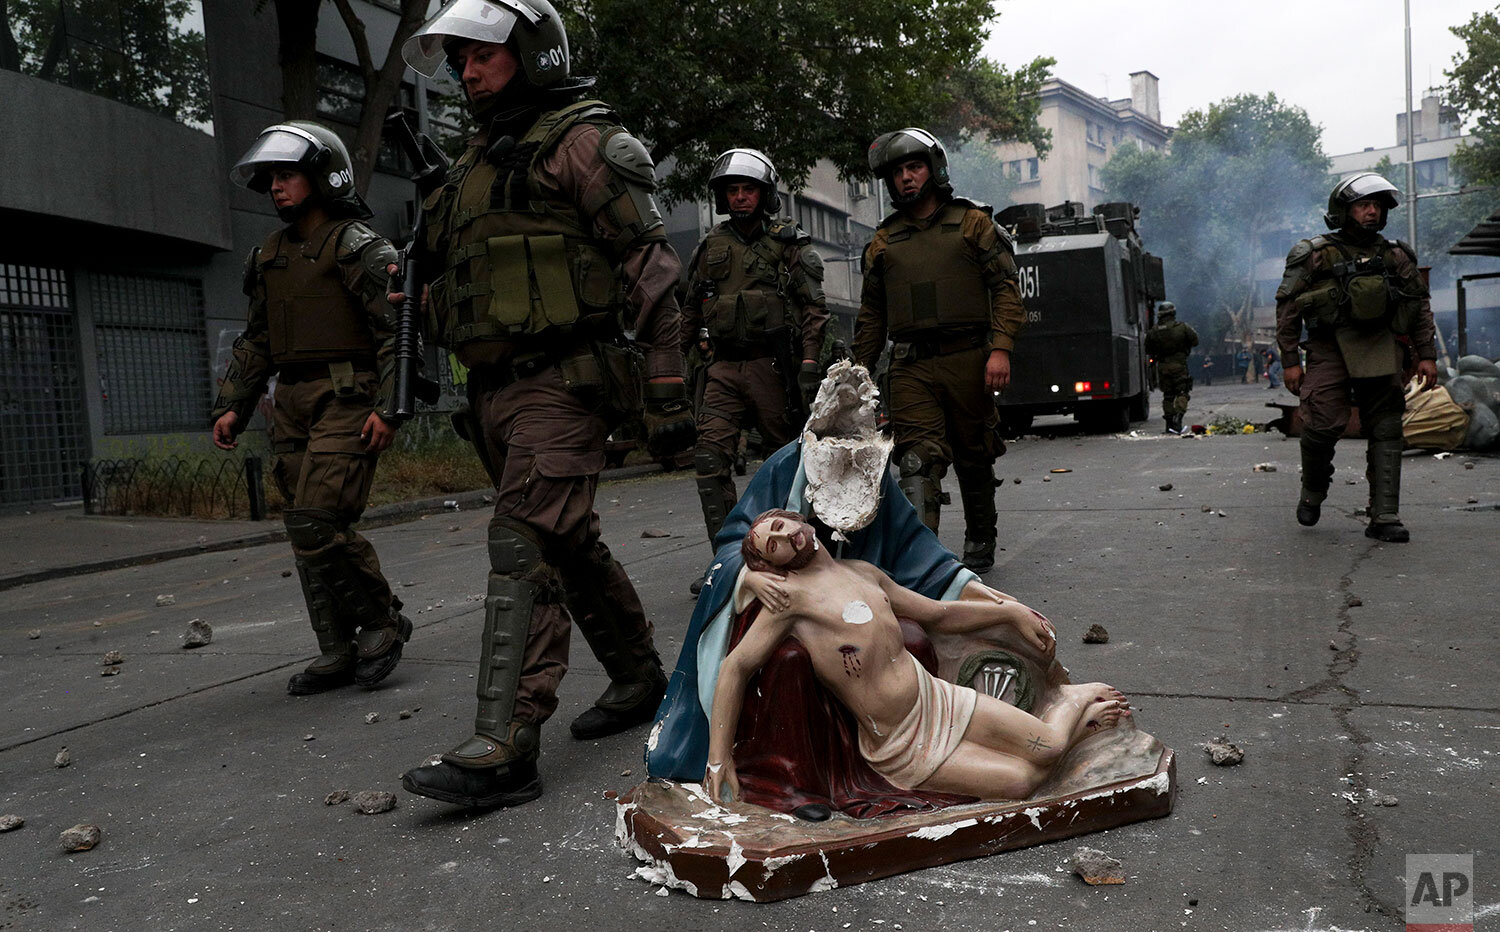  Police advance on anti-government protesters, past a religious statue that protesters removed from a church and then damaged, in Santiago, Chile, Friday, Nov. 8, 2019. Chile's president on Thursday announced measures to increase security and toughen